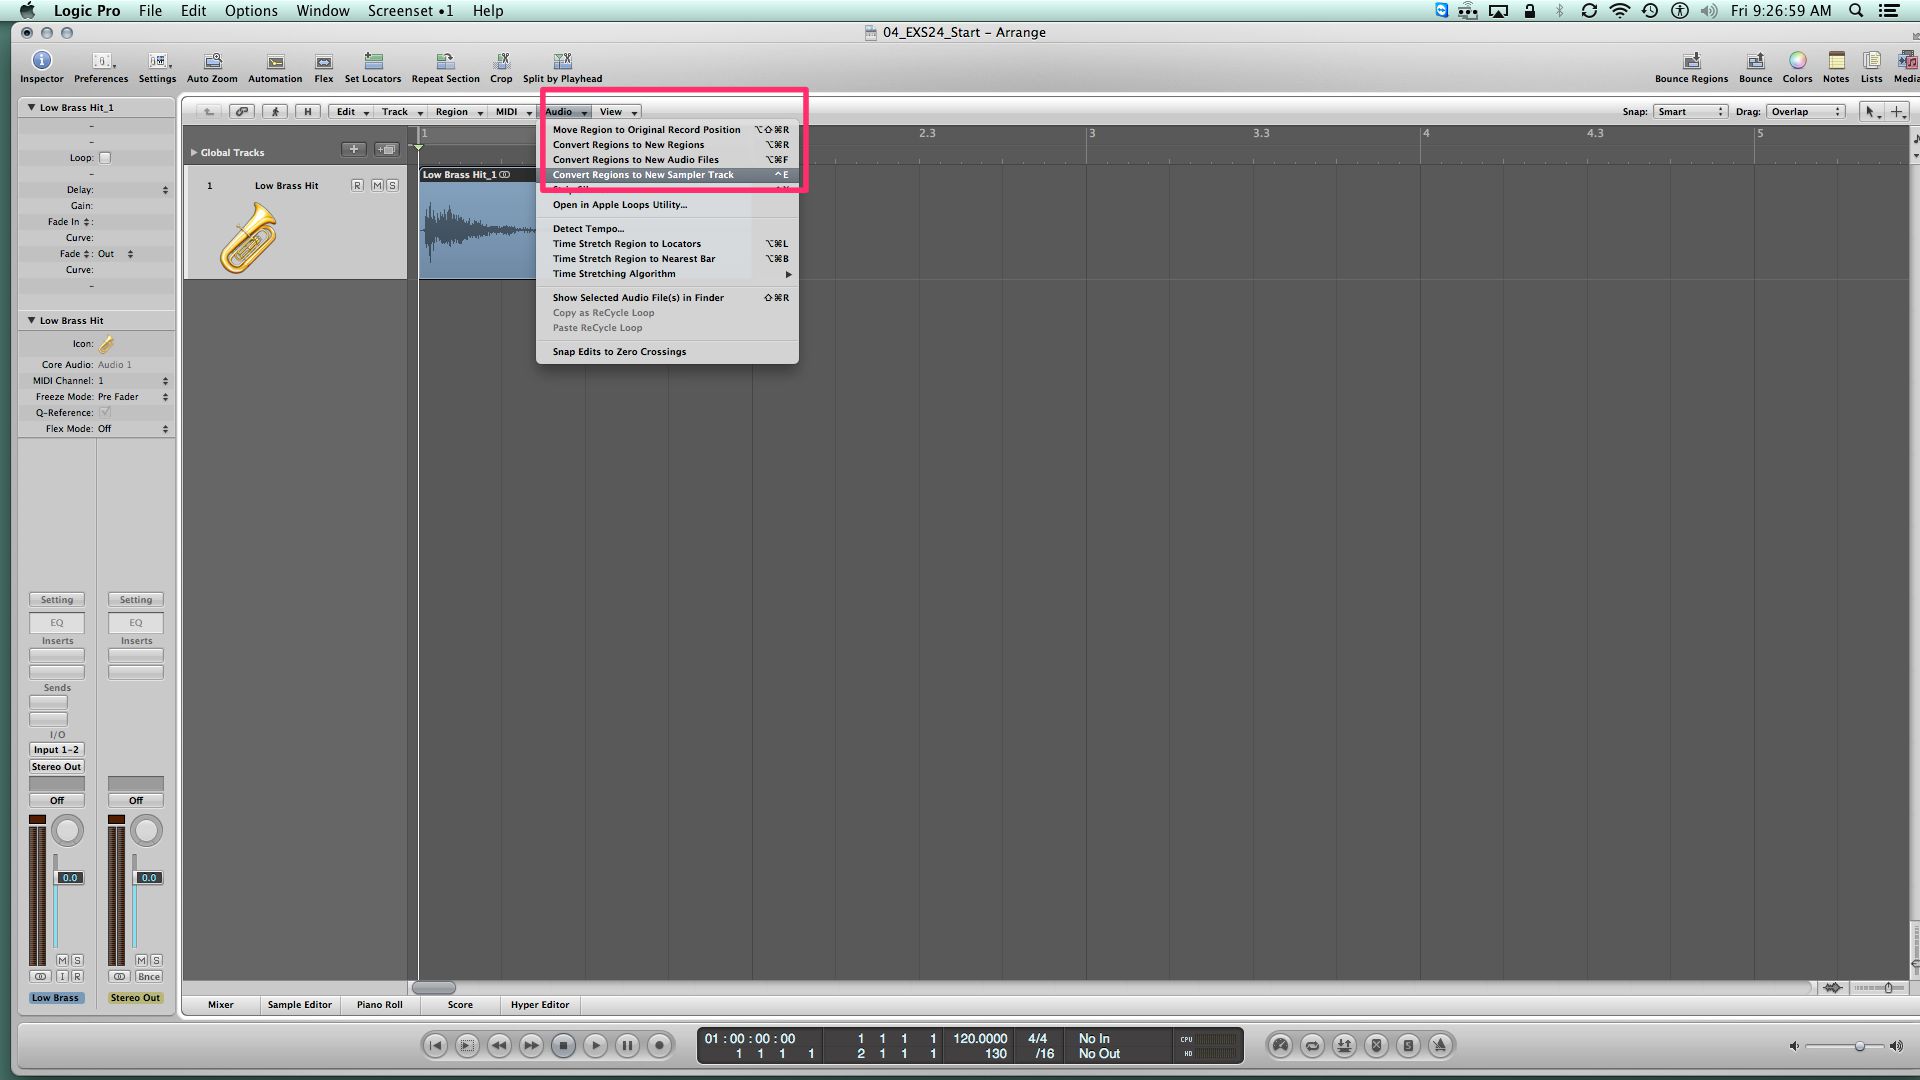 Pic 6: Convert Regions to New Sampler Track